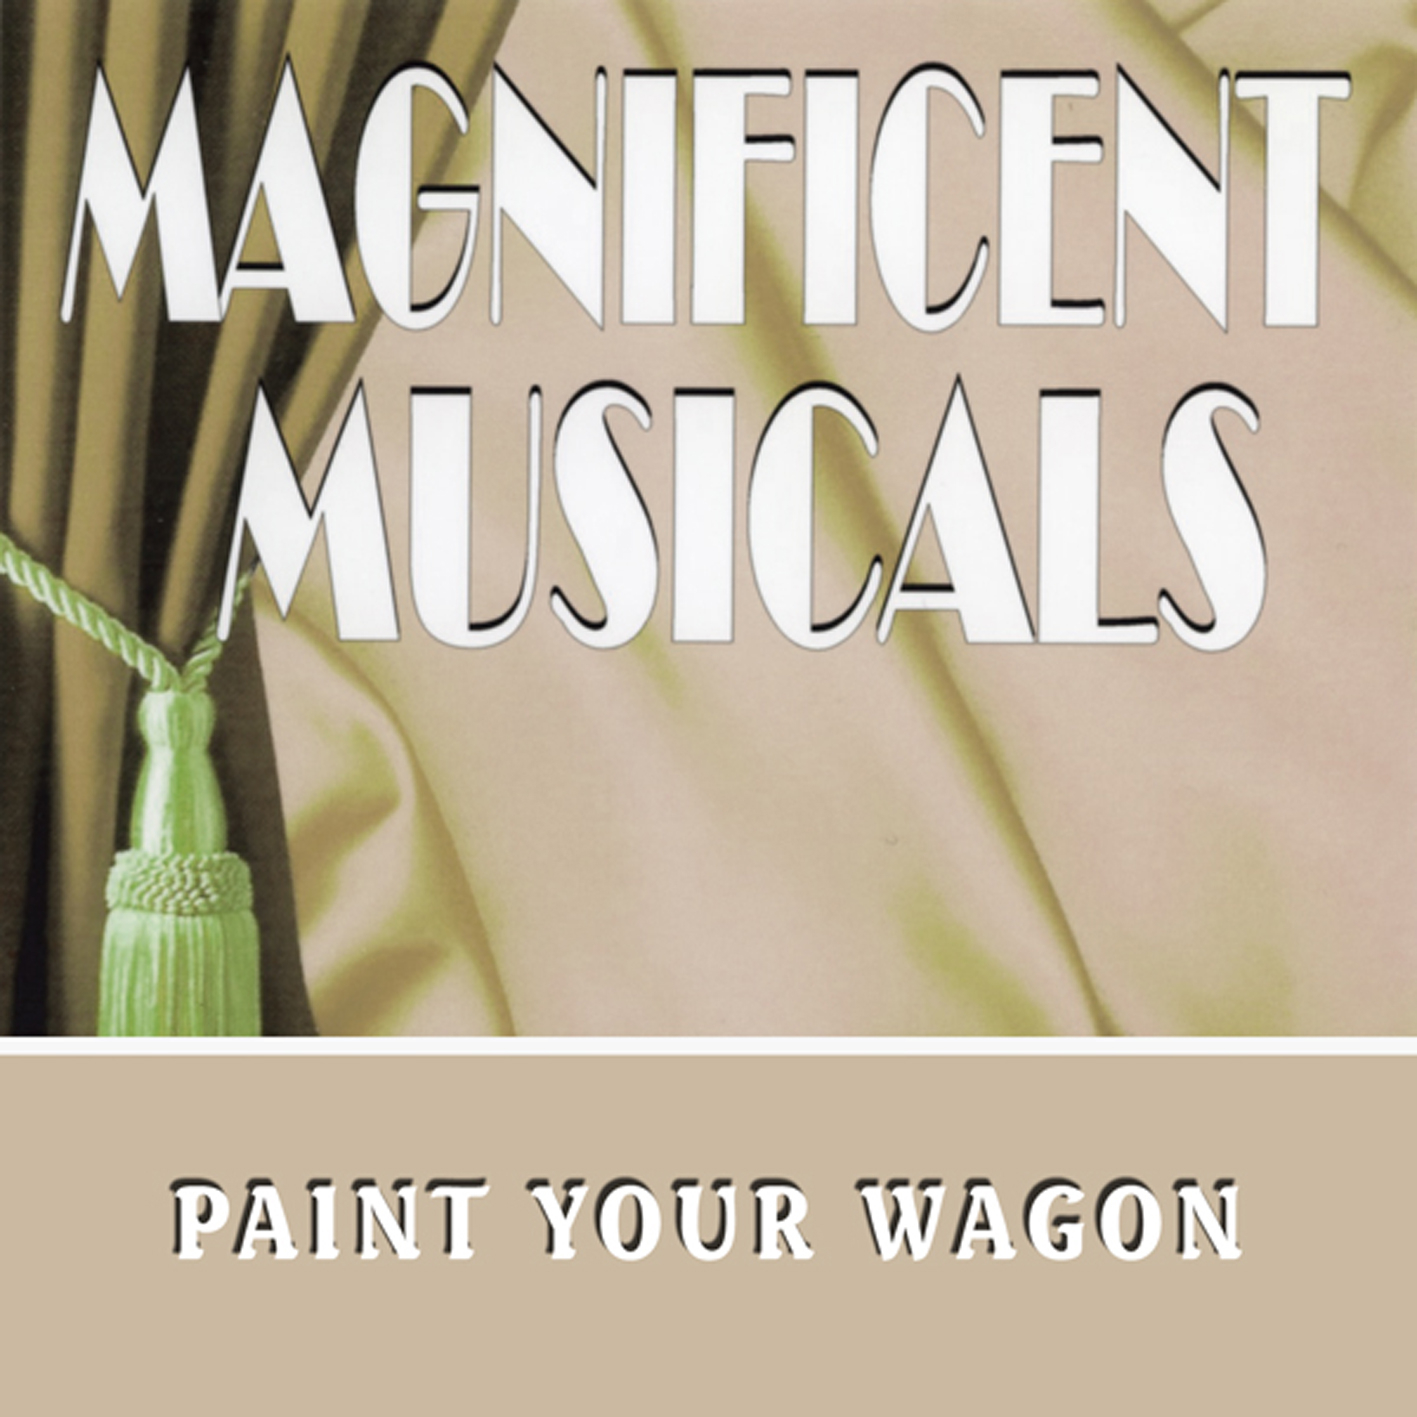 The Magnificent Musicals: Paint Your Wagon